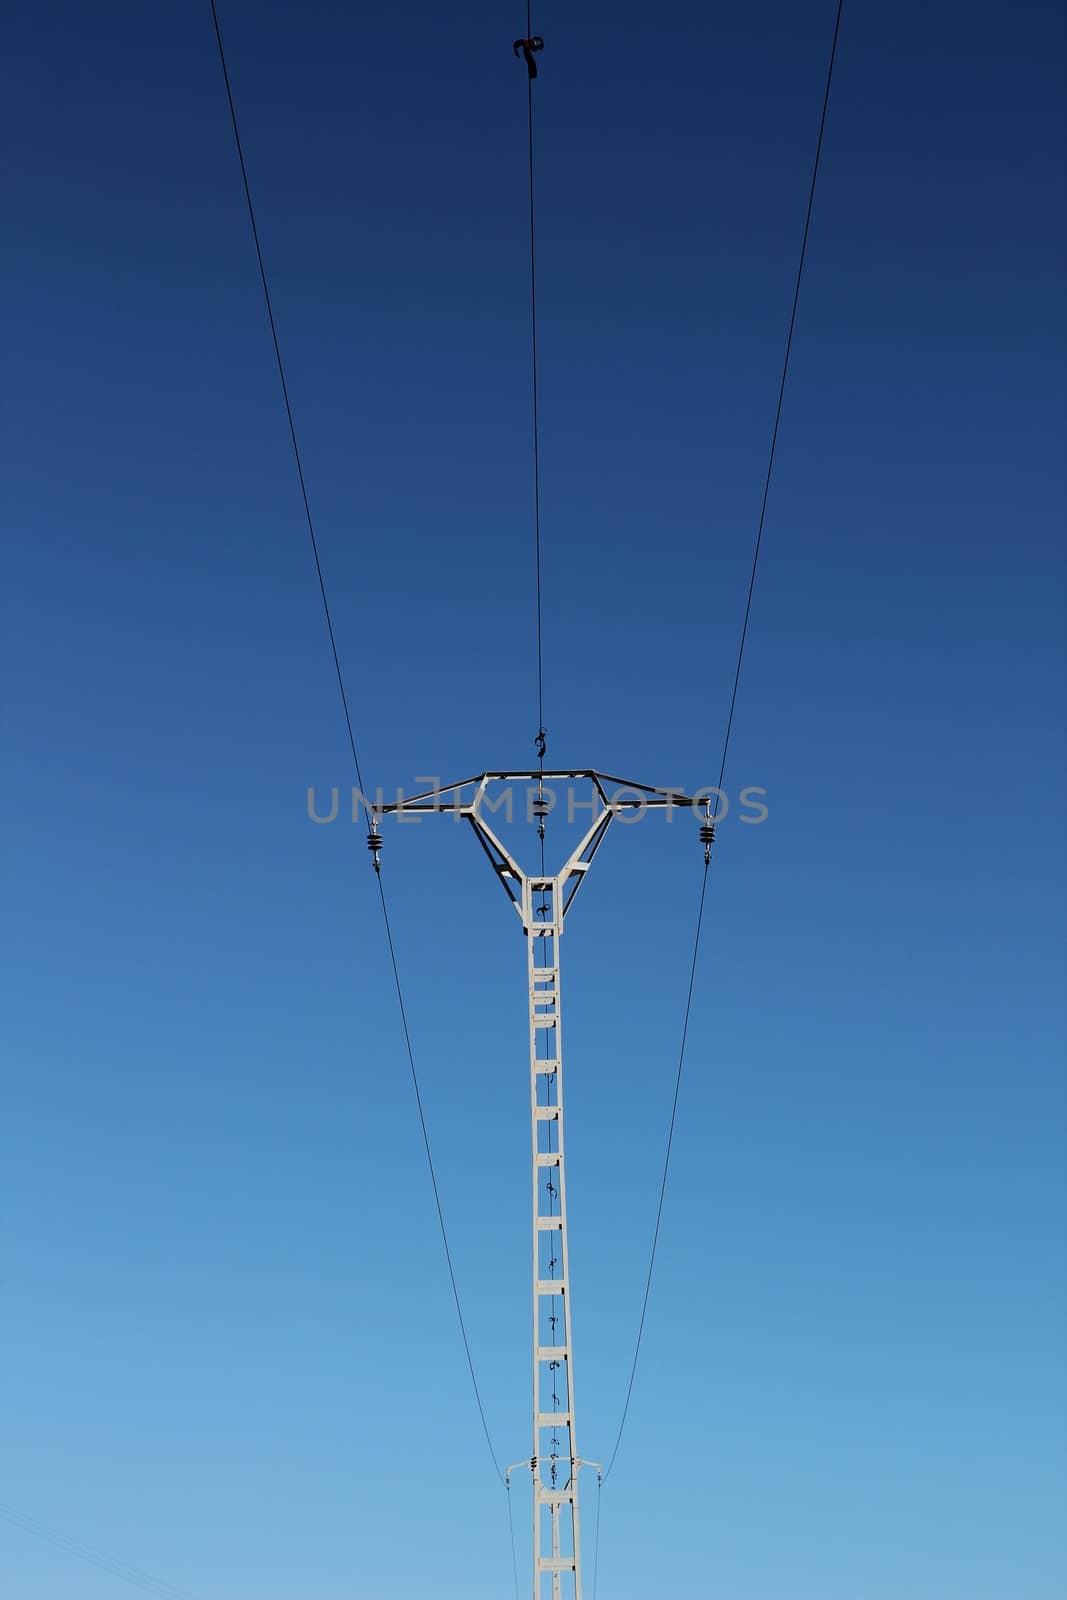 High voltage towers in the mountain